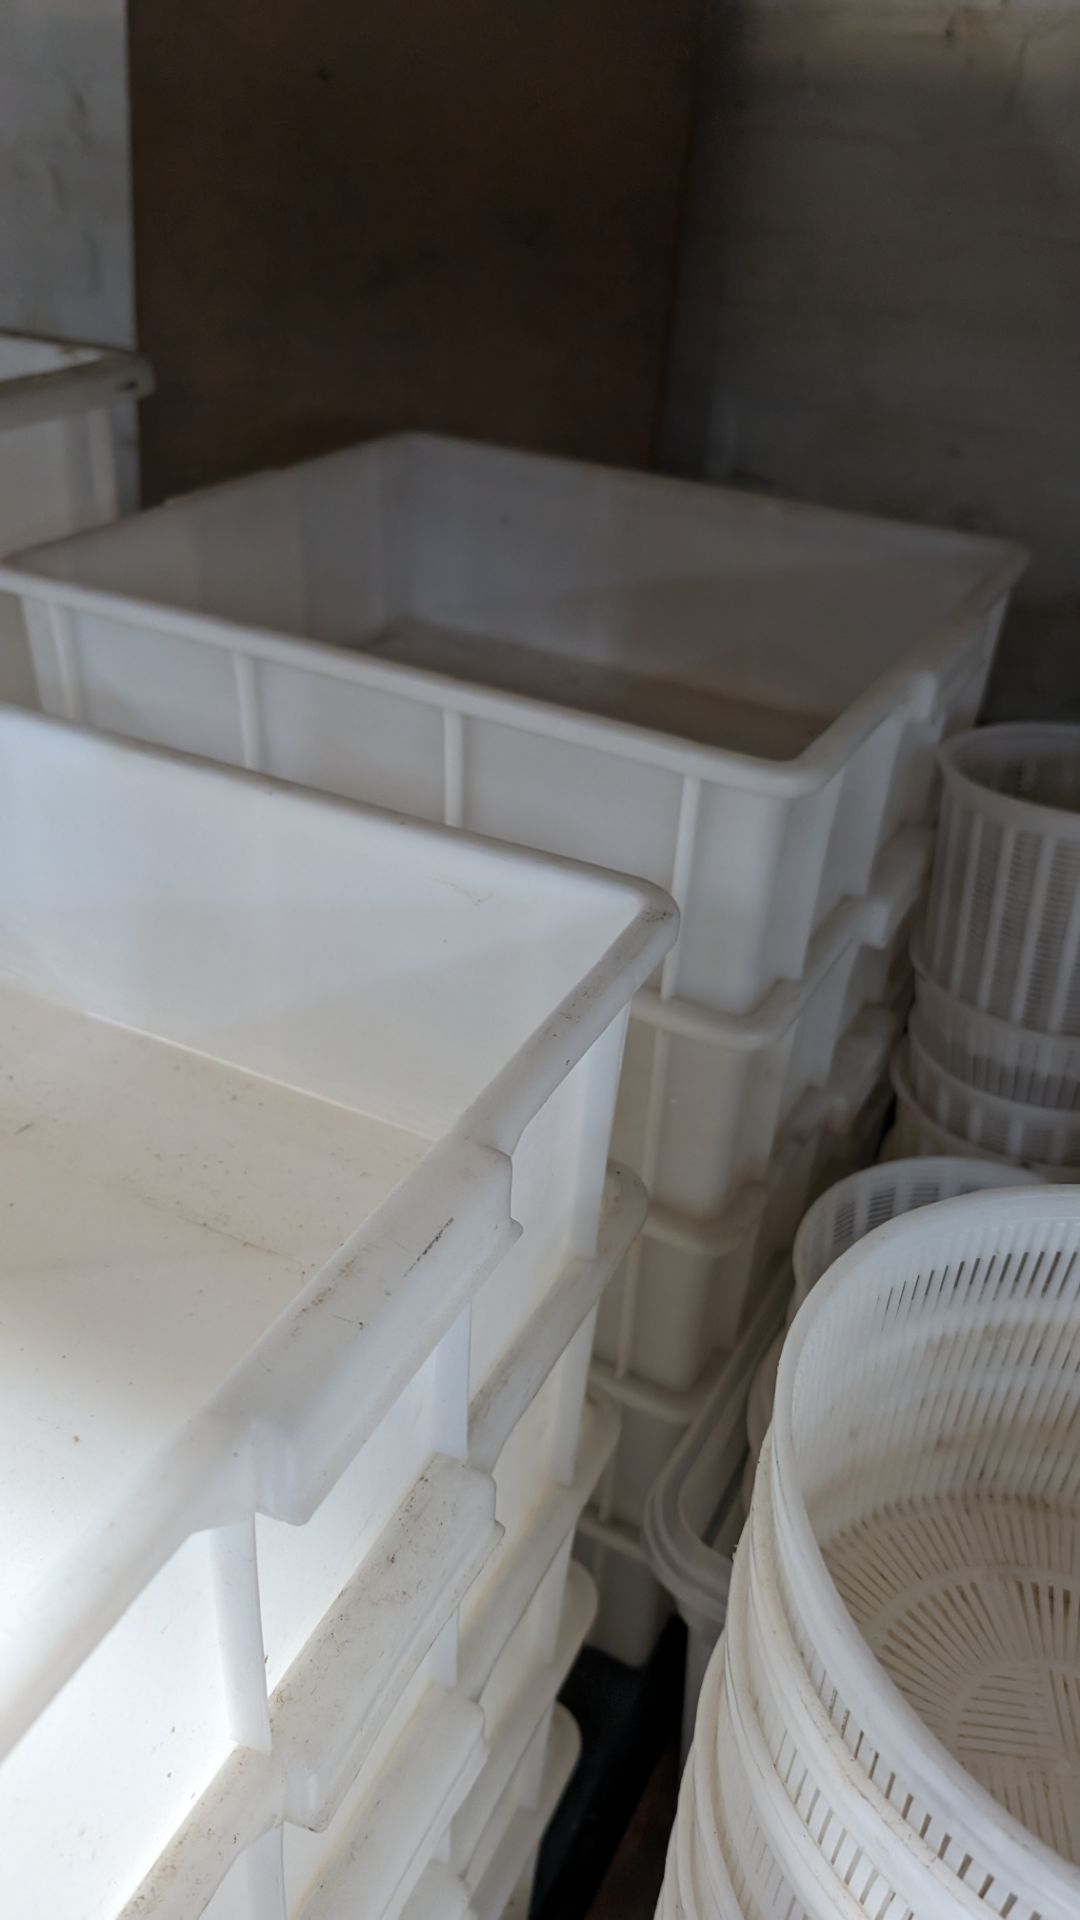 Contents of a pallet of large rectangular and square heavy duty plastic storage bins. - Image 4 of 5